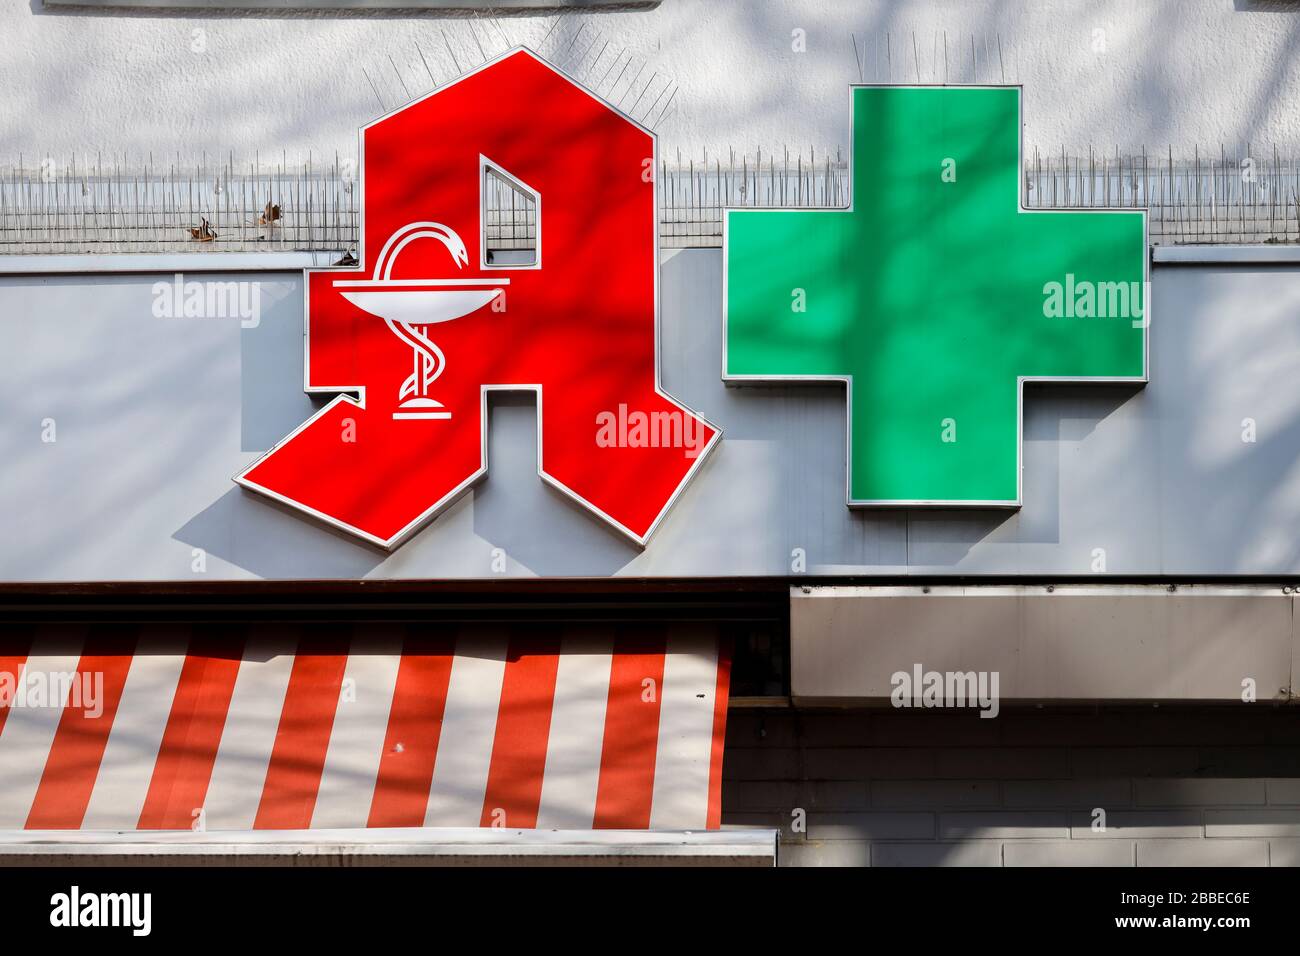 27.03.2020, Essen, Ruhr Area, North Rhine-Westphalia, Germany - Pharmacies are system relevant in the corona crisis, red logo and green cross on the f Stock Photo